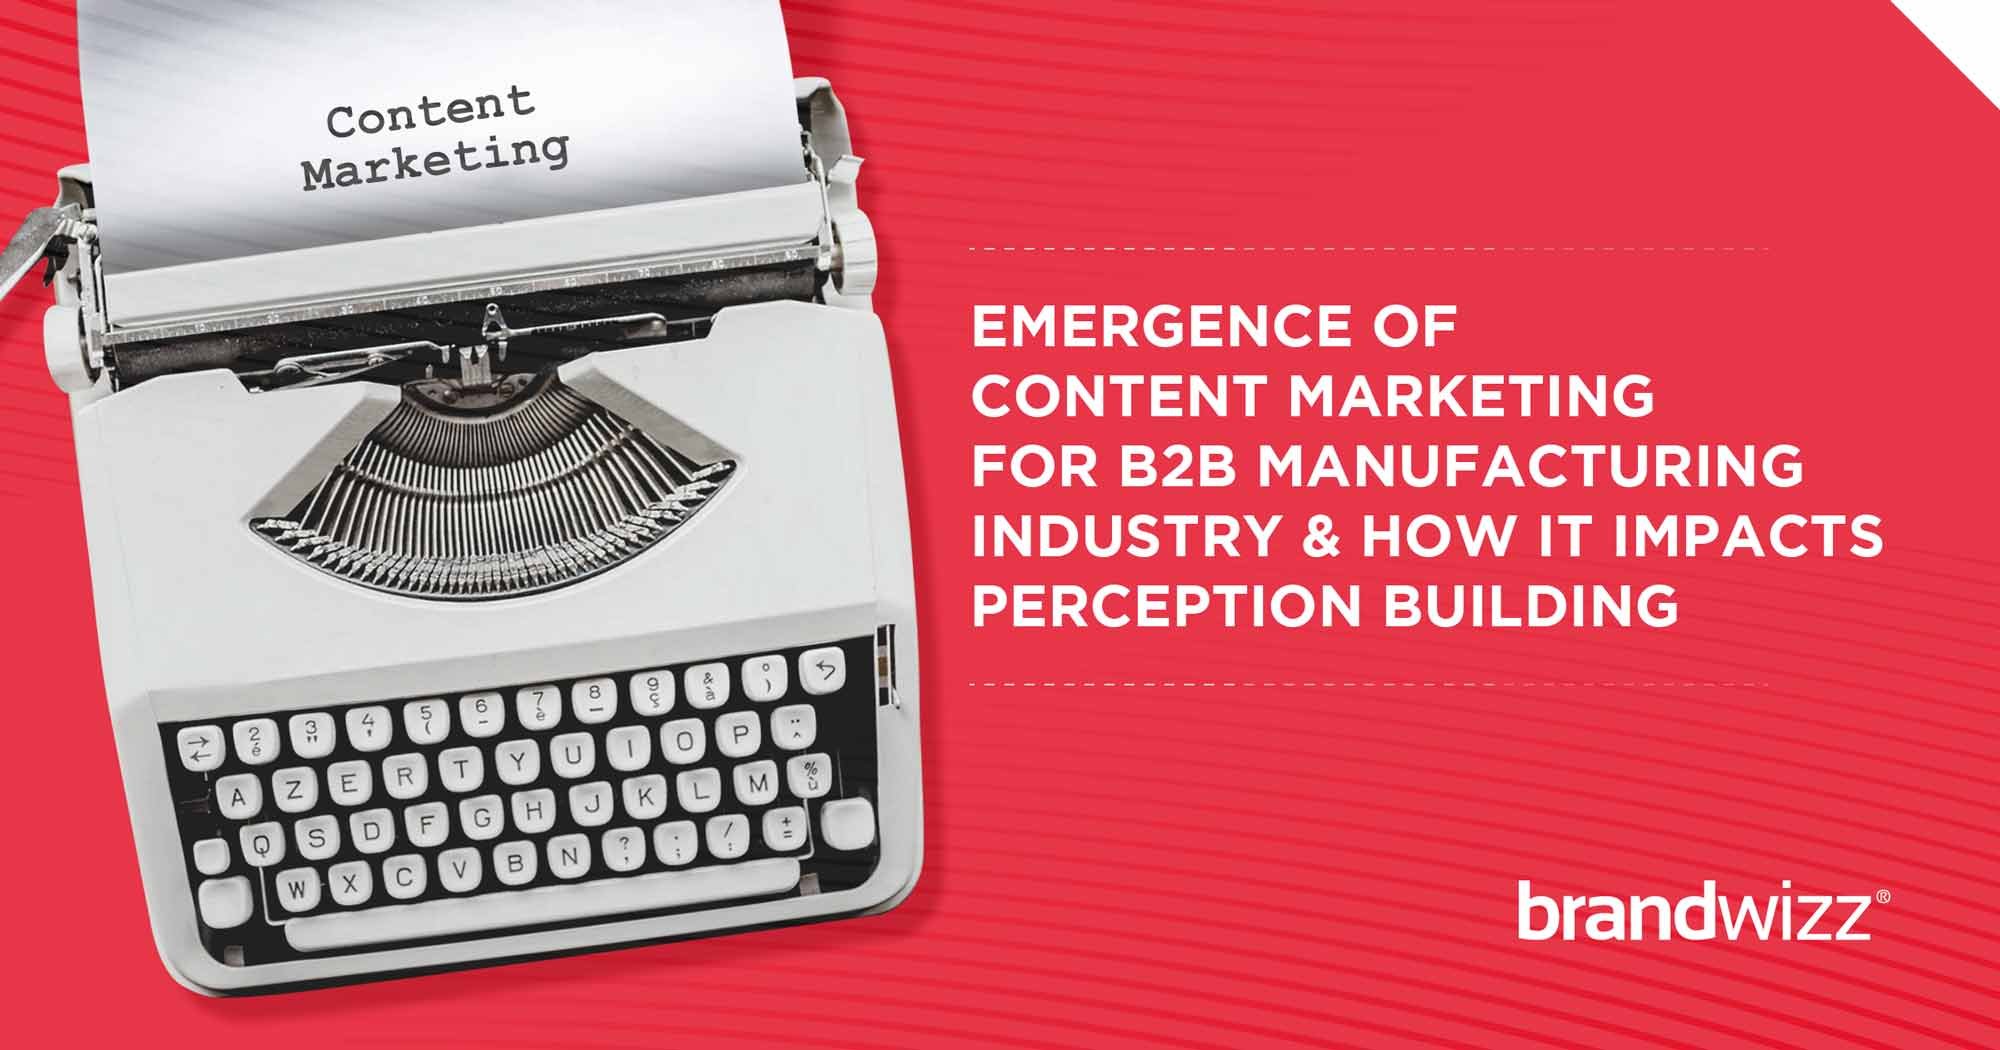 Emergence of Content Marketing For B2B Manufacturing Industry & How It Impacts Perception Building